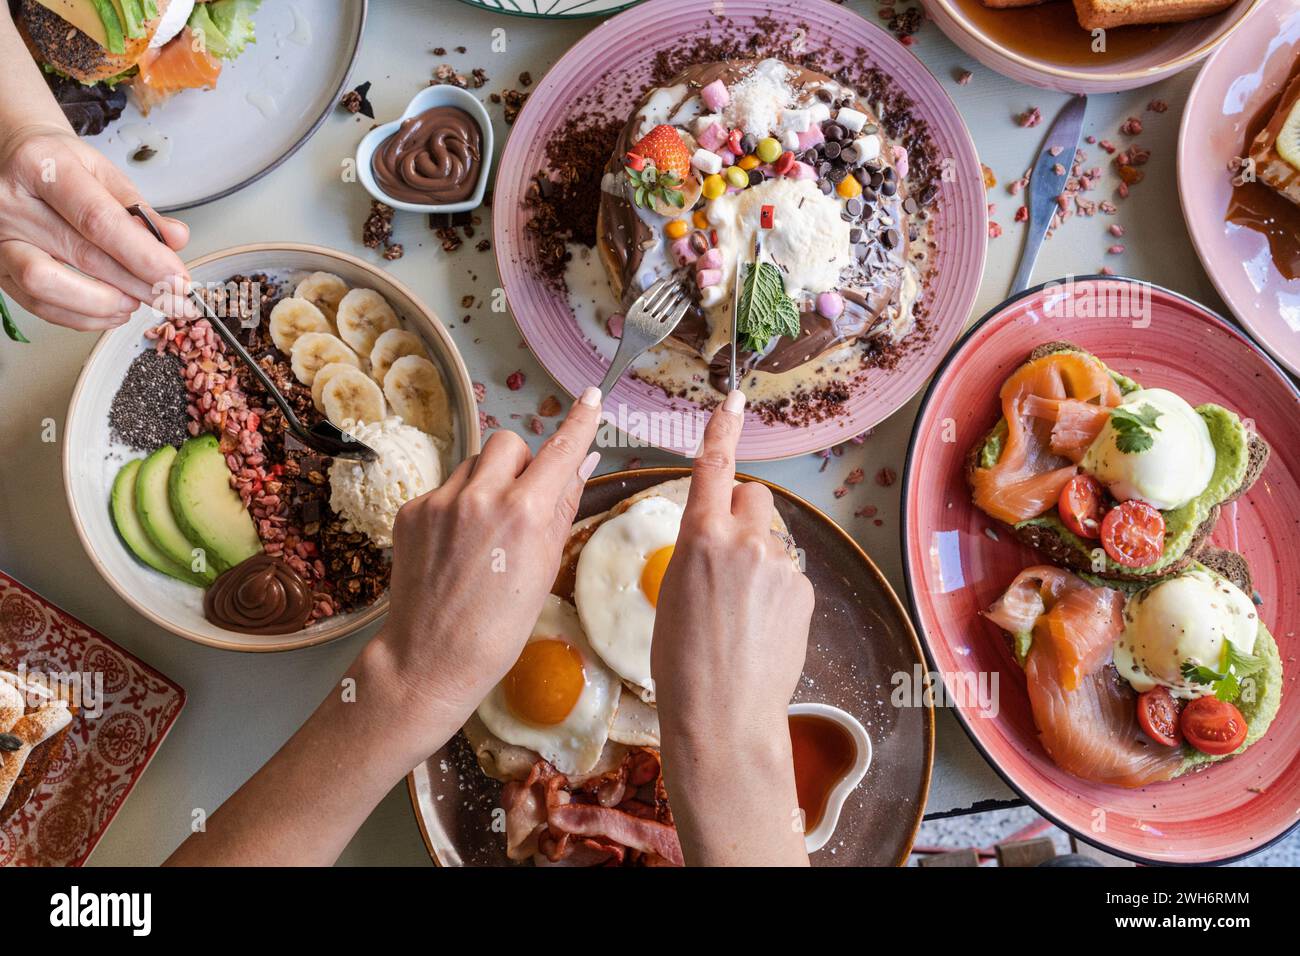 Breakfast is served with various dishes including eggs, bacon, pancakes and fruits on a colorful table. Stock Photo